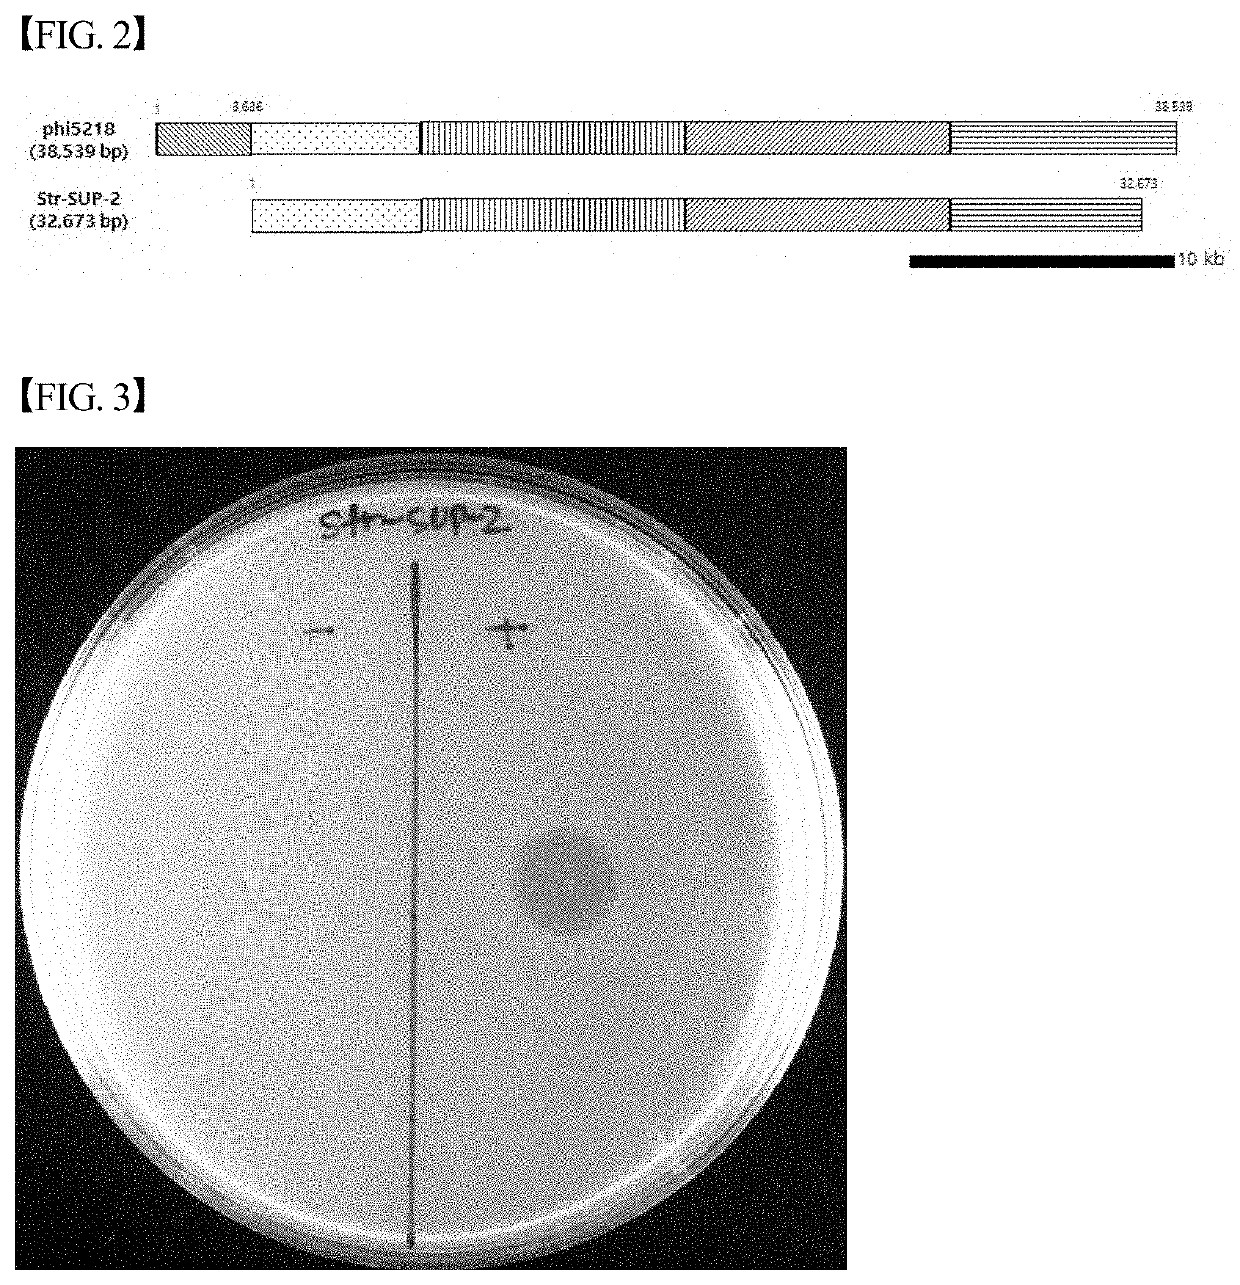 Novel streptococcus suis bacteriophage str-sup-2, and use thereof for inhibiting proliferation of streptococcus suis strains